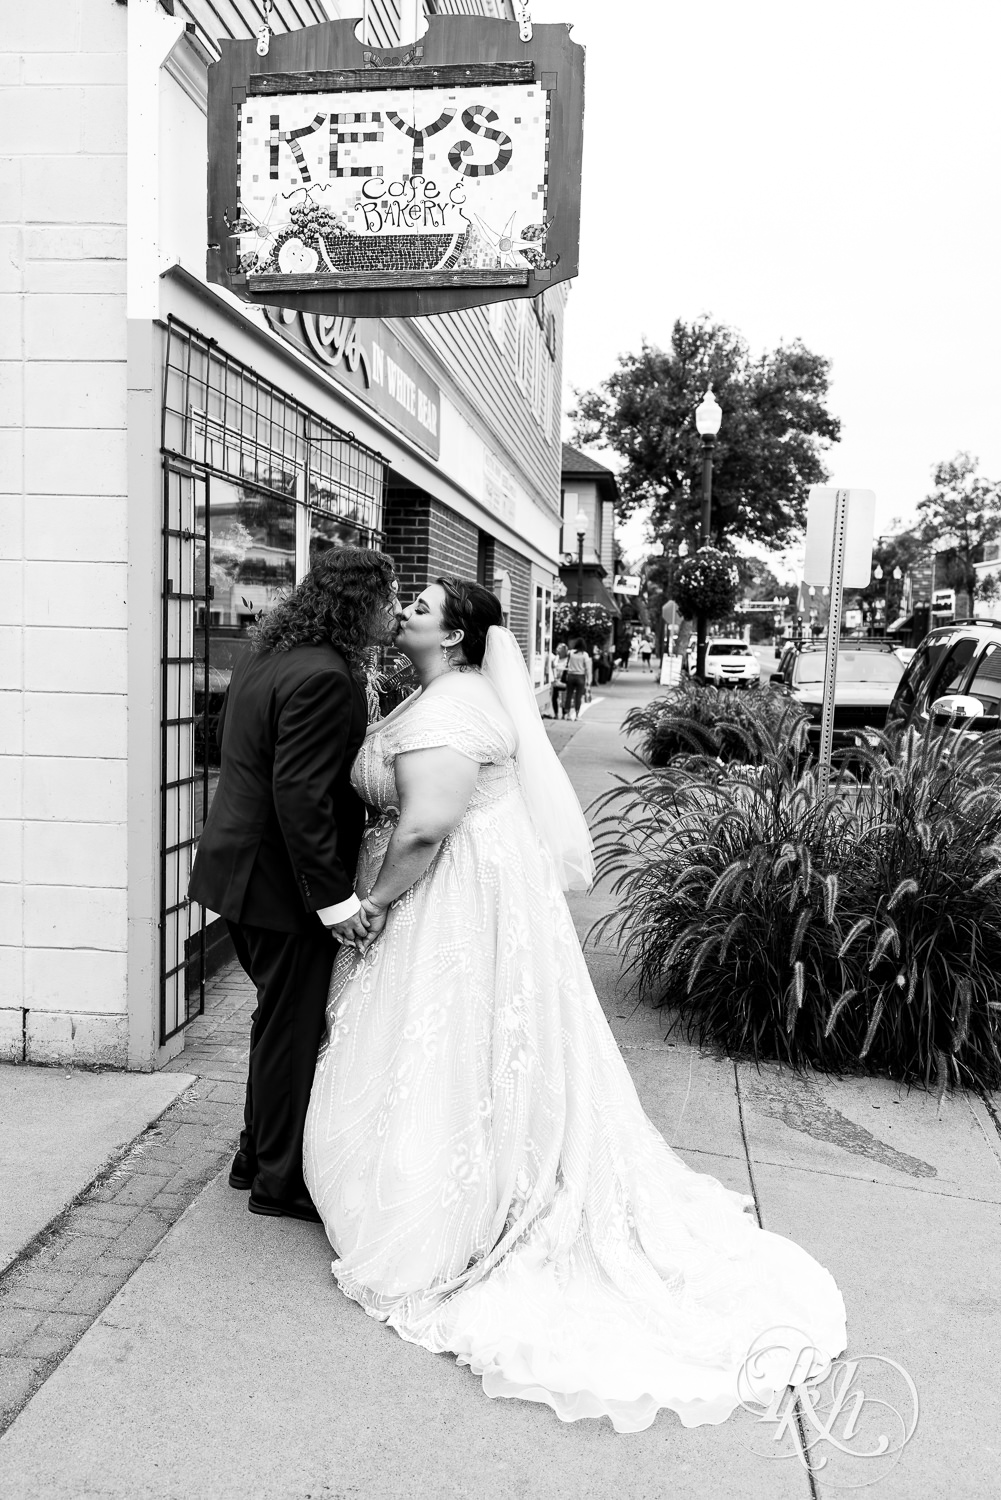 Bride and groom kiss in front of Key's Cafe in White Bear Lake, Minnesota.